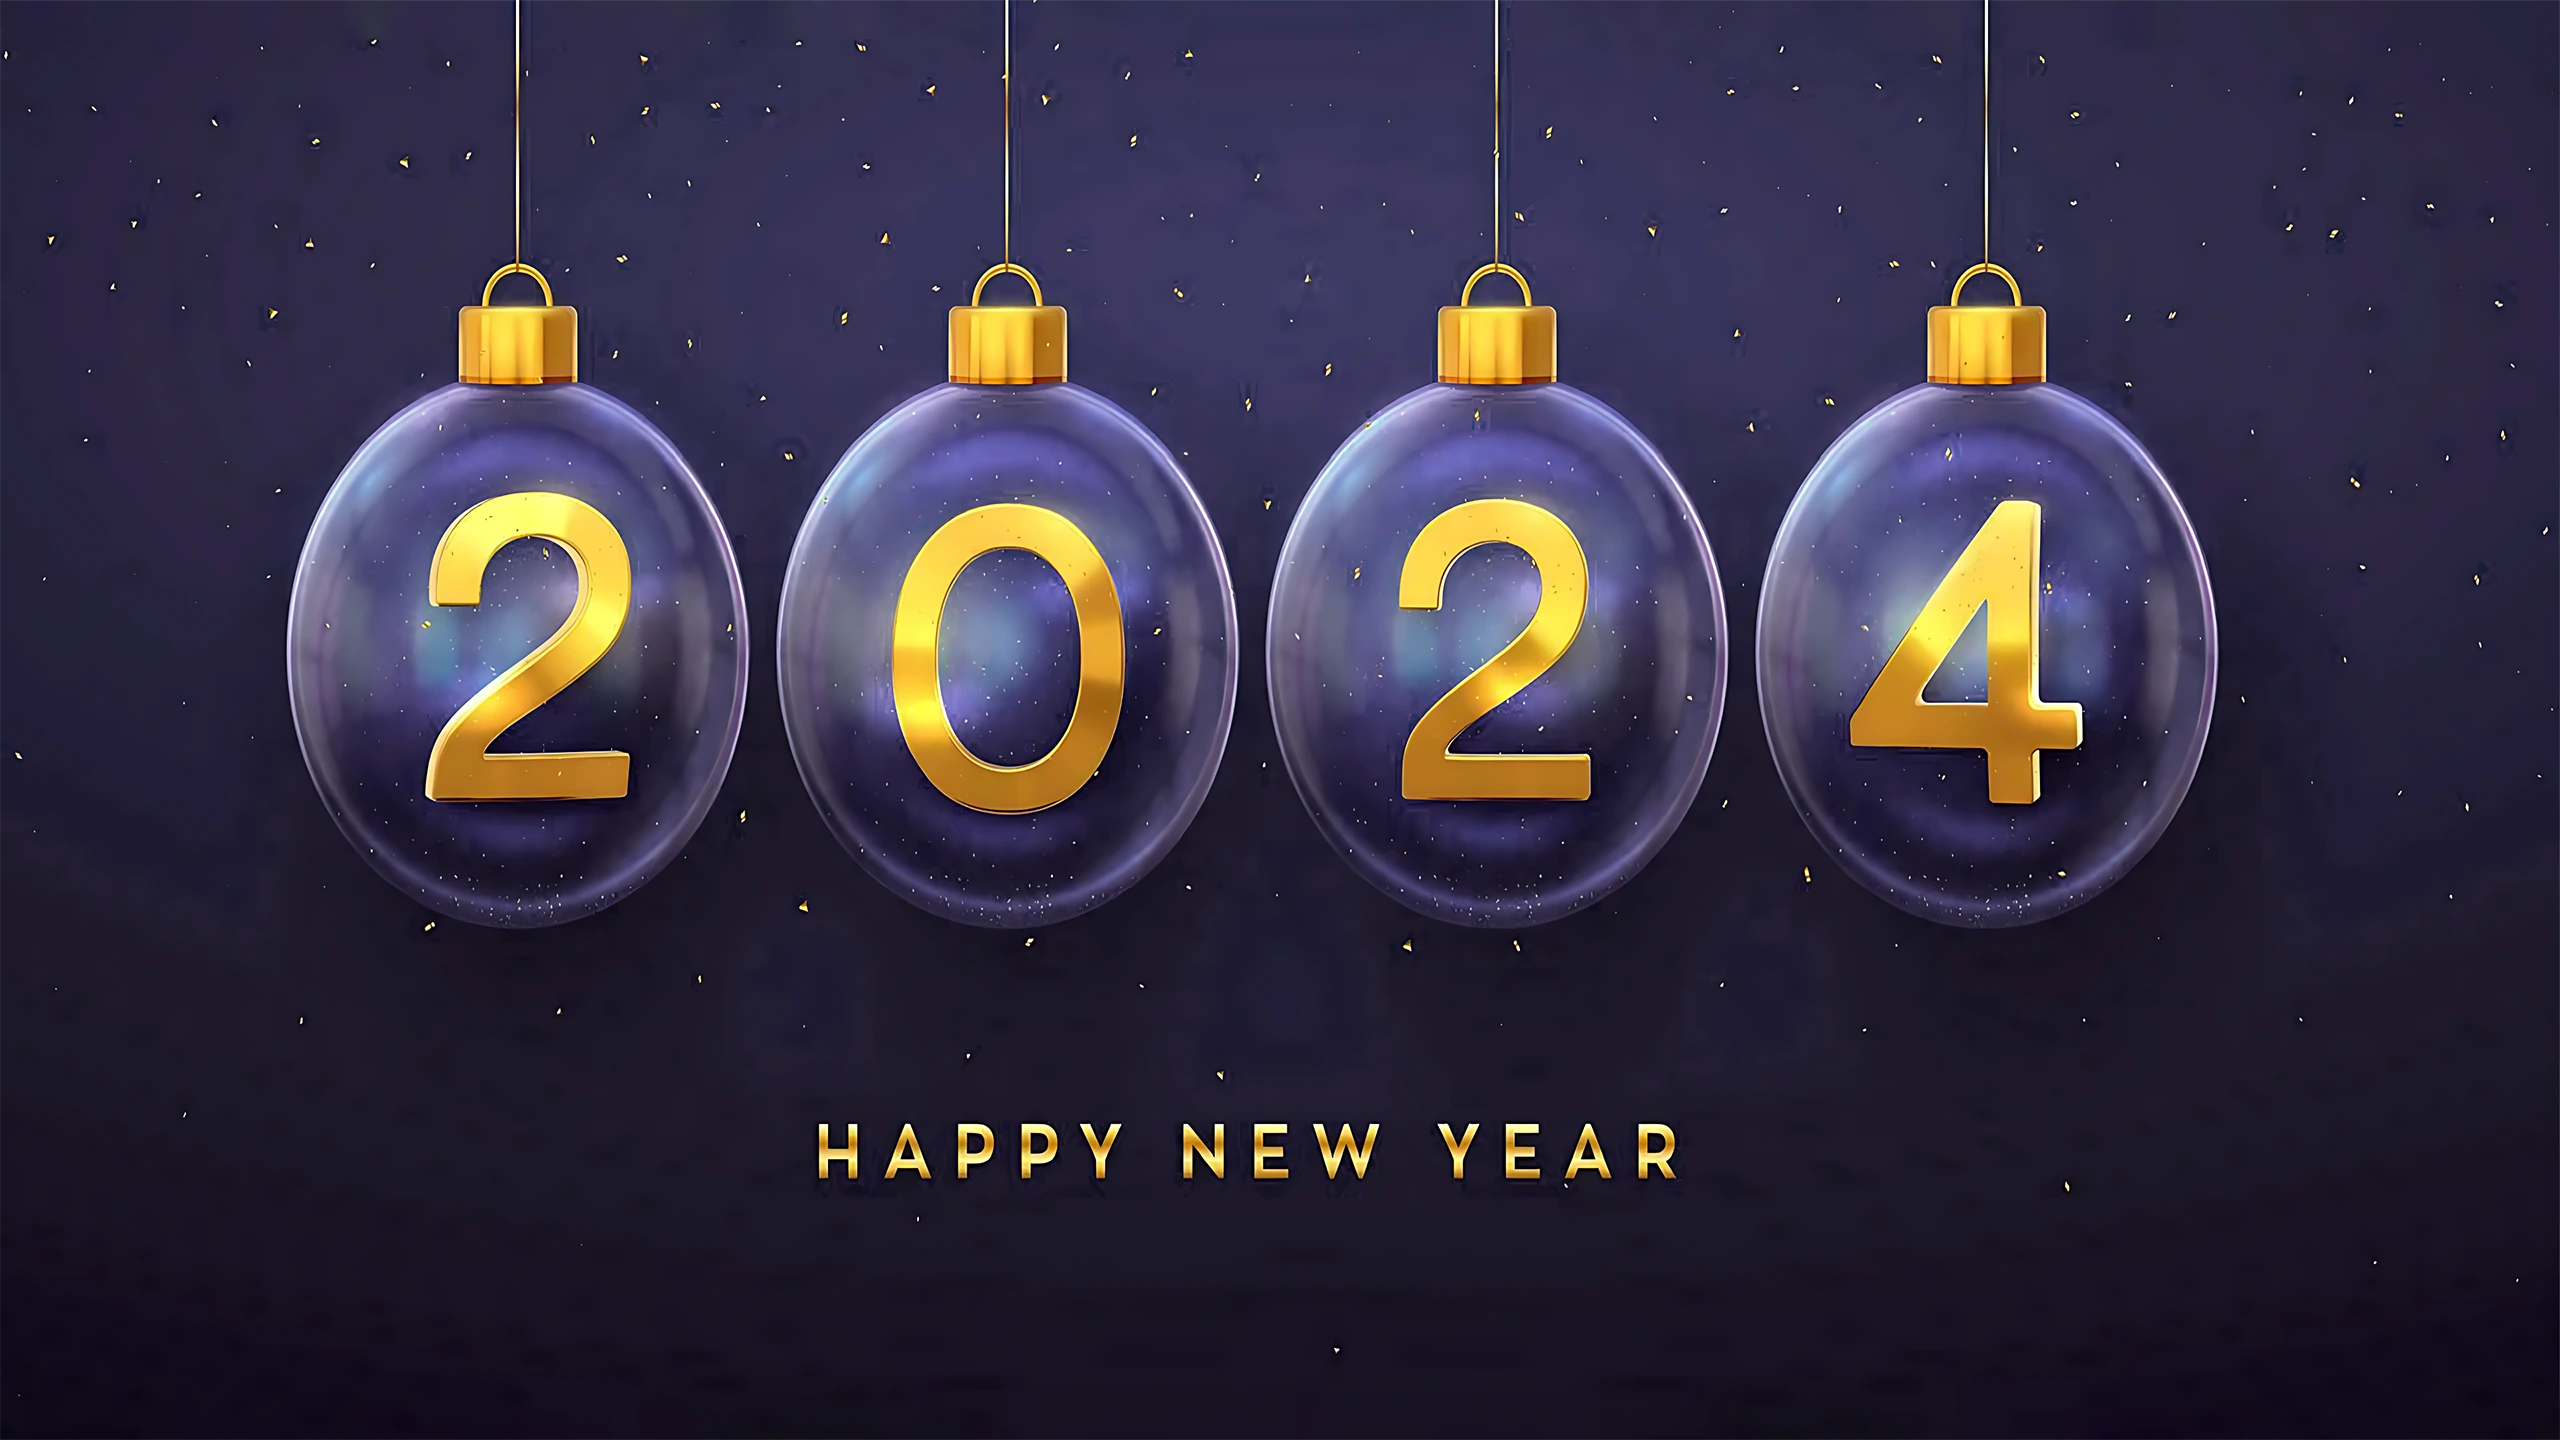 Beautiful wallpaper for New Year 2024 + Wallpapers Download